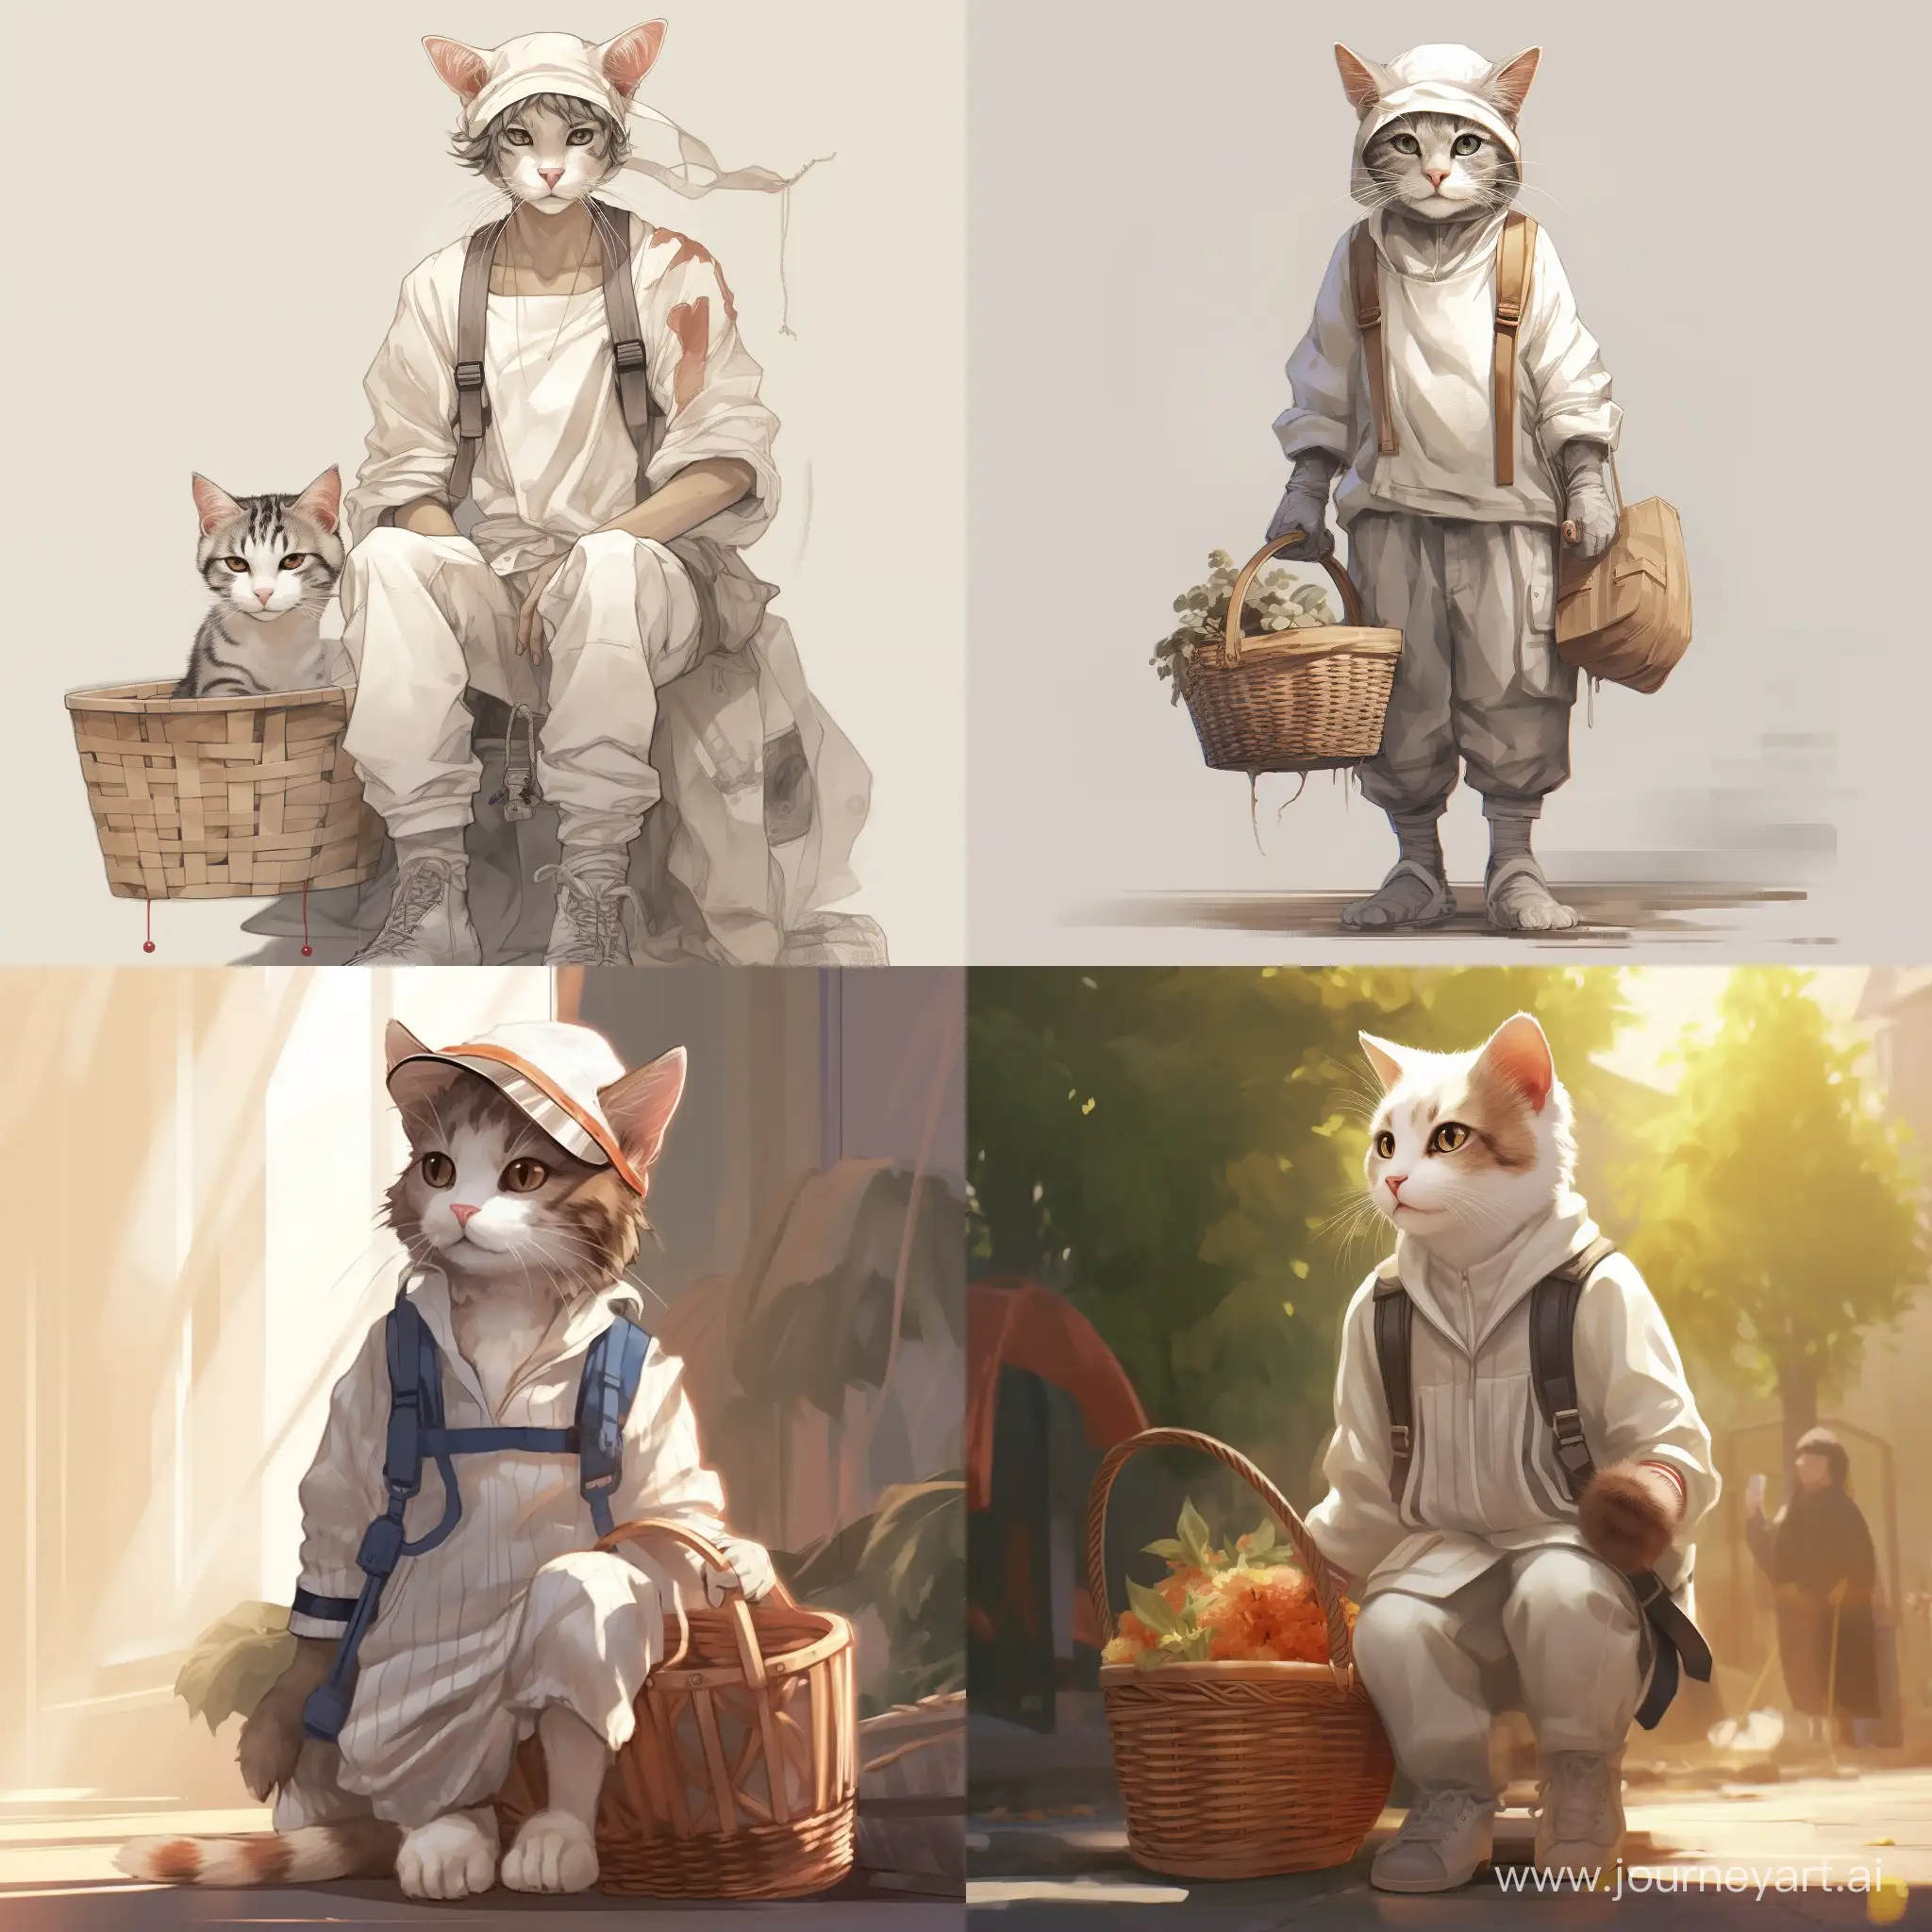 Cat dressed in overalls with a basket, in the style of street style, light white and light brown, transparent/translucent medium, mori kei, striped, street life scenes, hip-hop style (Aspect ratio: 3:4)